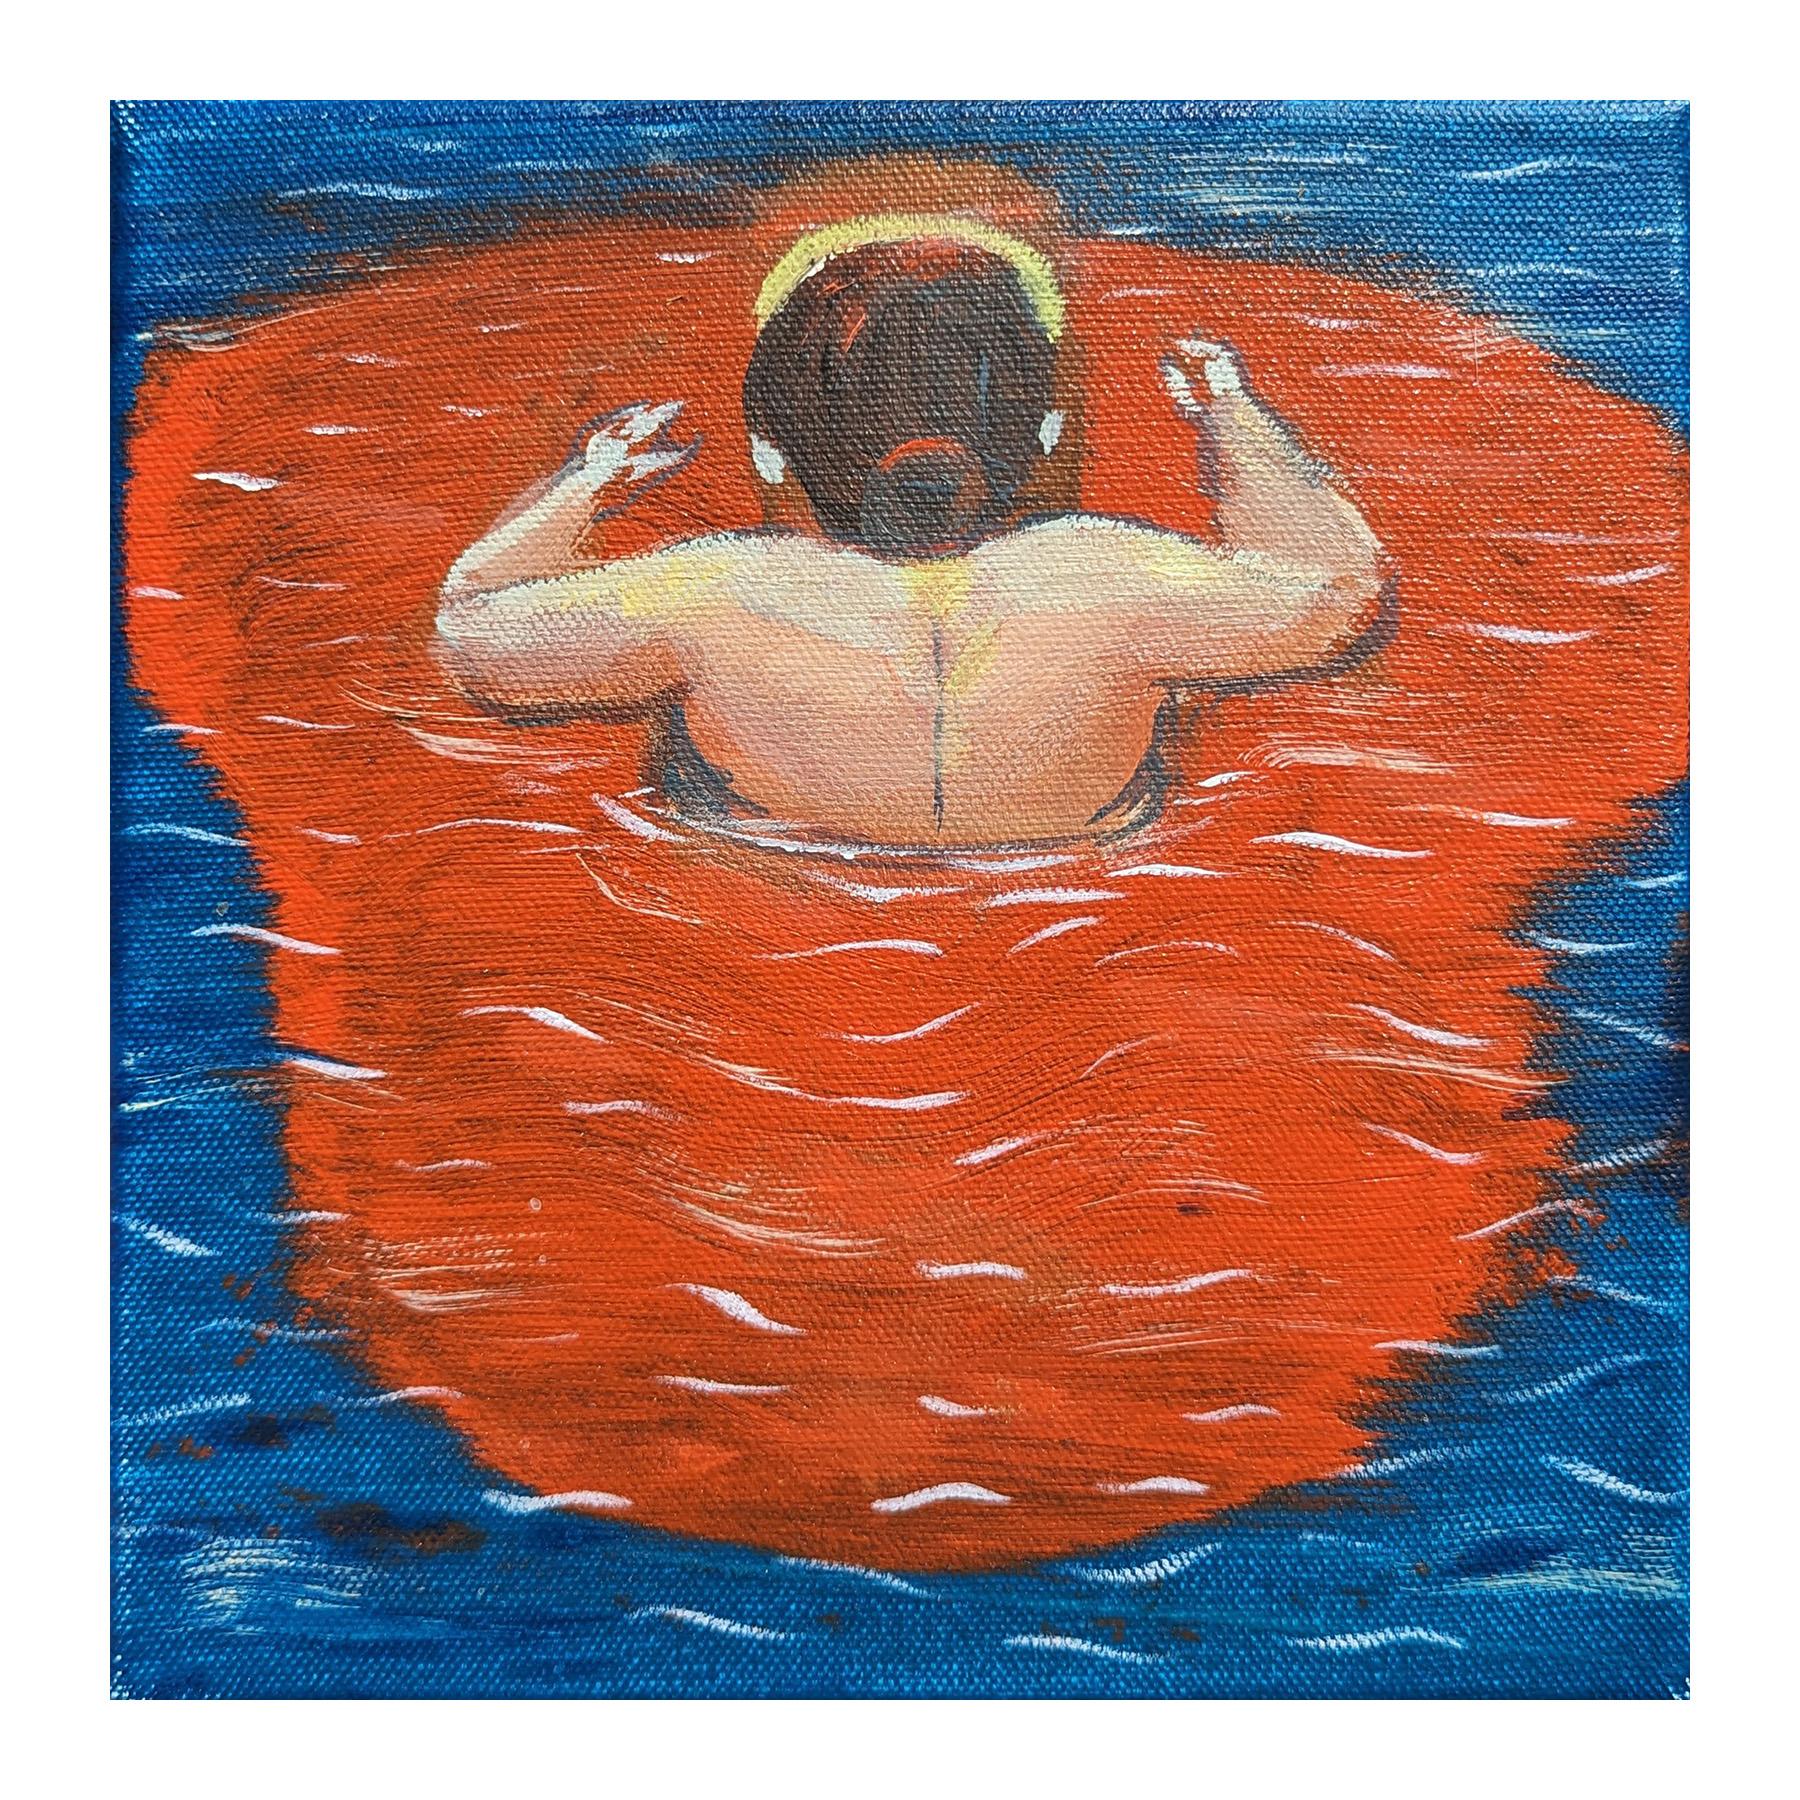 Blue and red toned painting by contemporary Houston based artist Moisés Villafuerte. The work features a woman surrounded by a pool of red crossing the Rio Bravo, also know as the Rio Grande. Signed, titled, and dated on the reverse. Currently